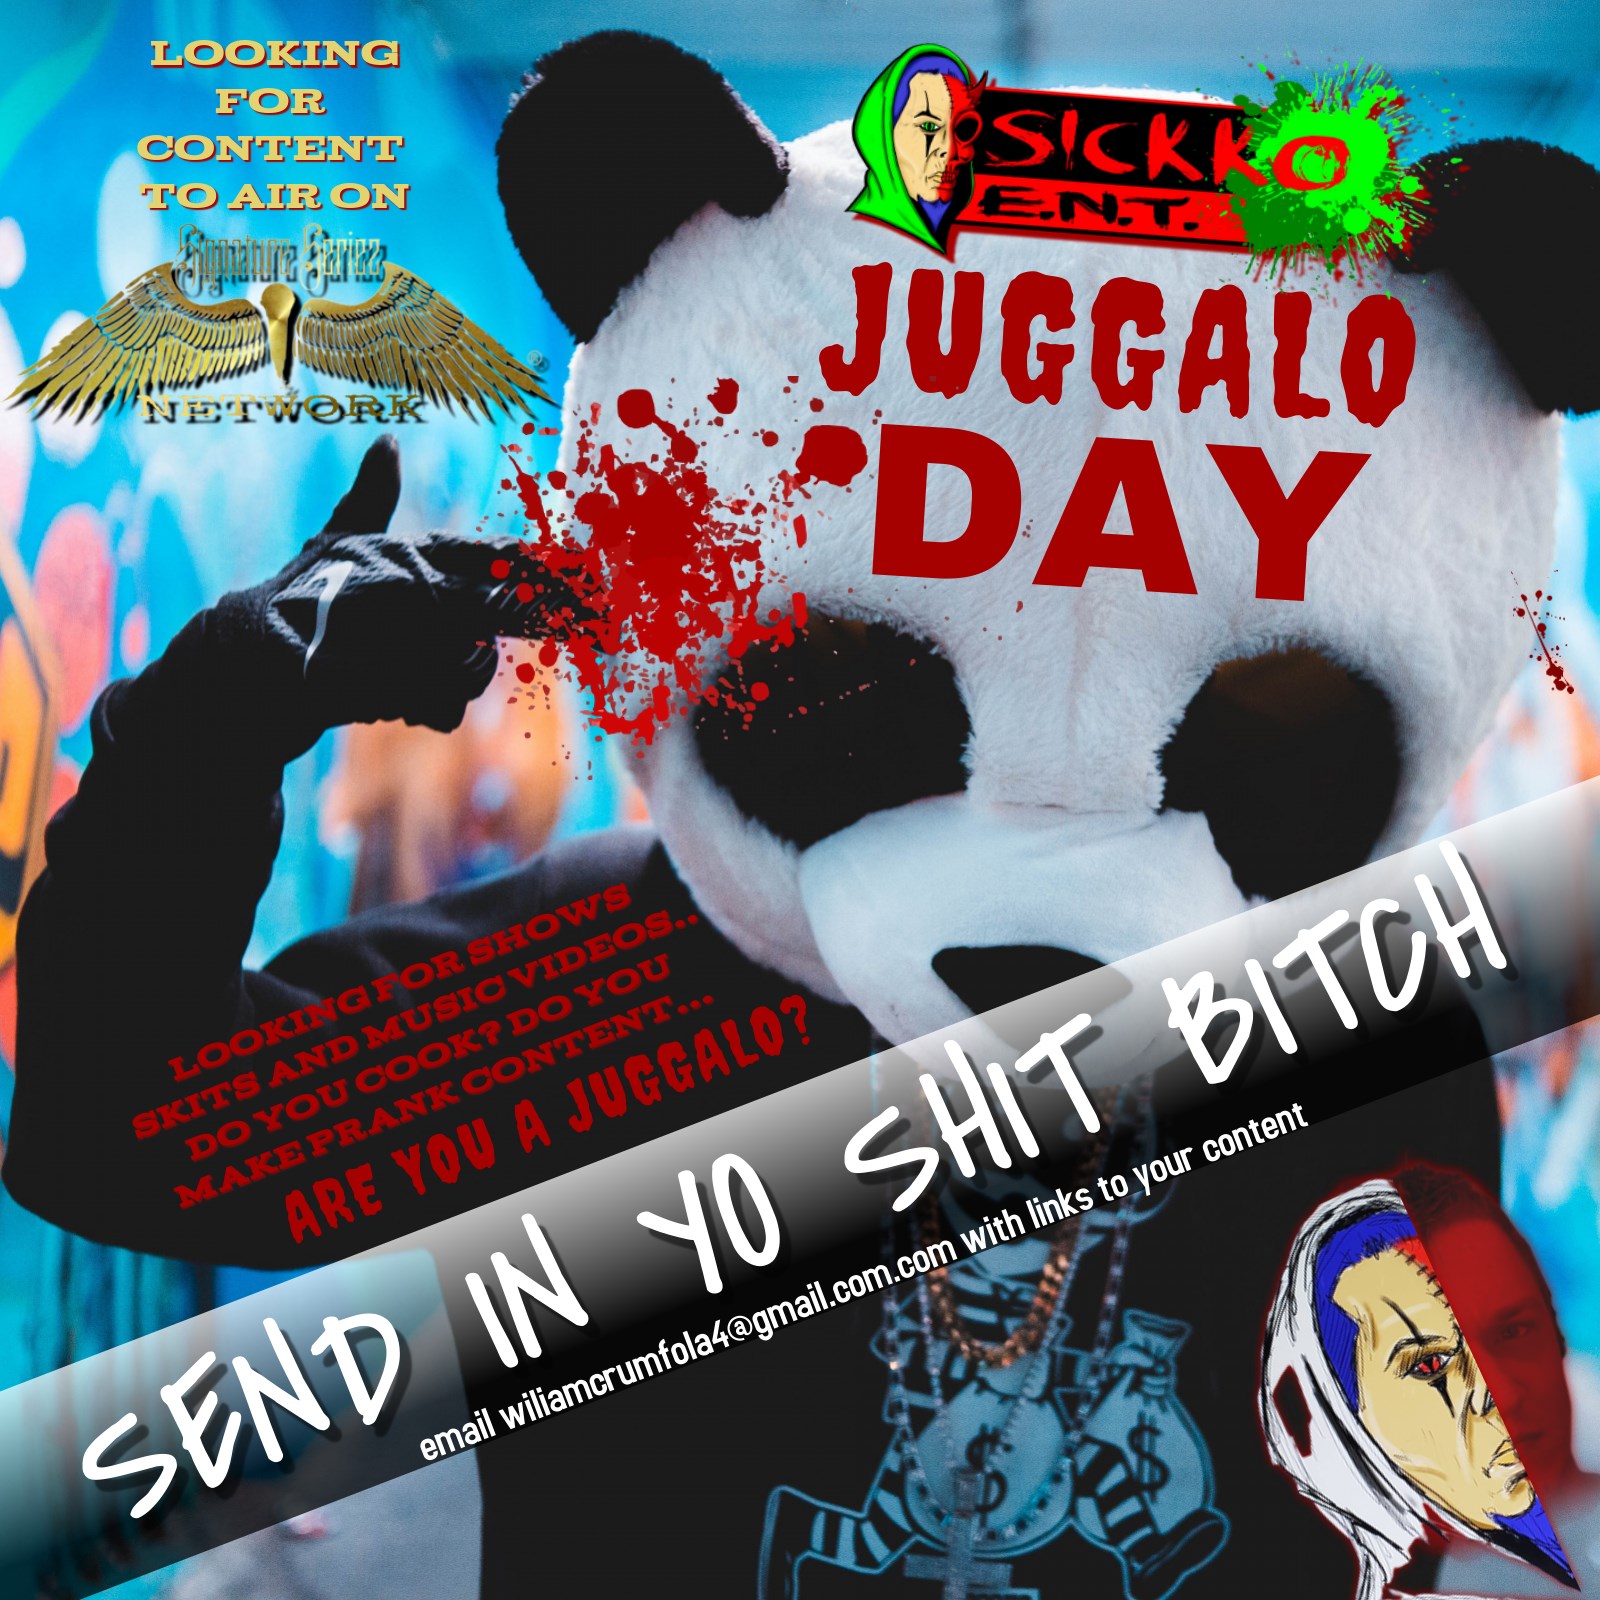 Submissions Wanted for Juggalo Day Episode on Roku’s Signature Seriez